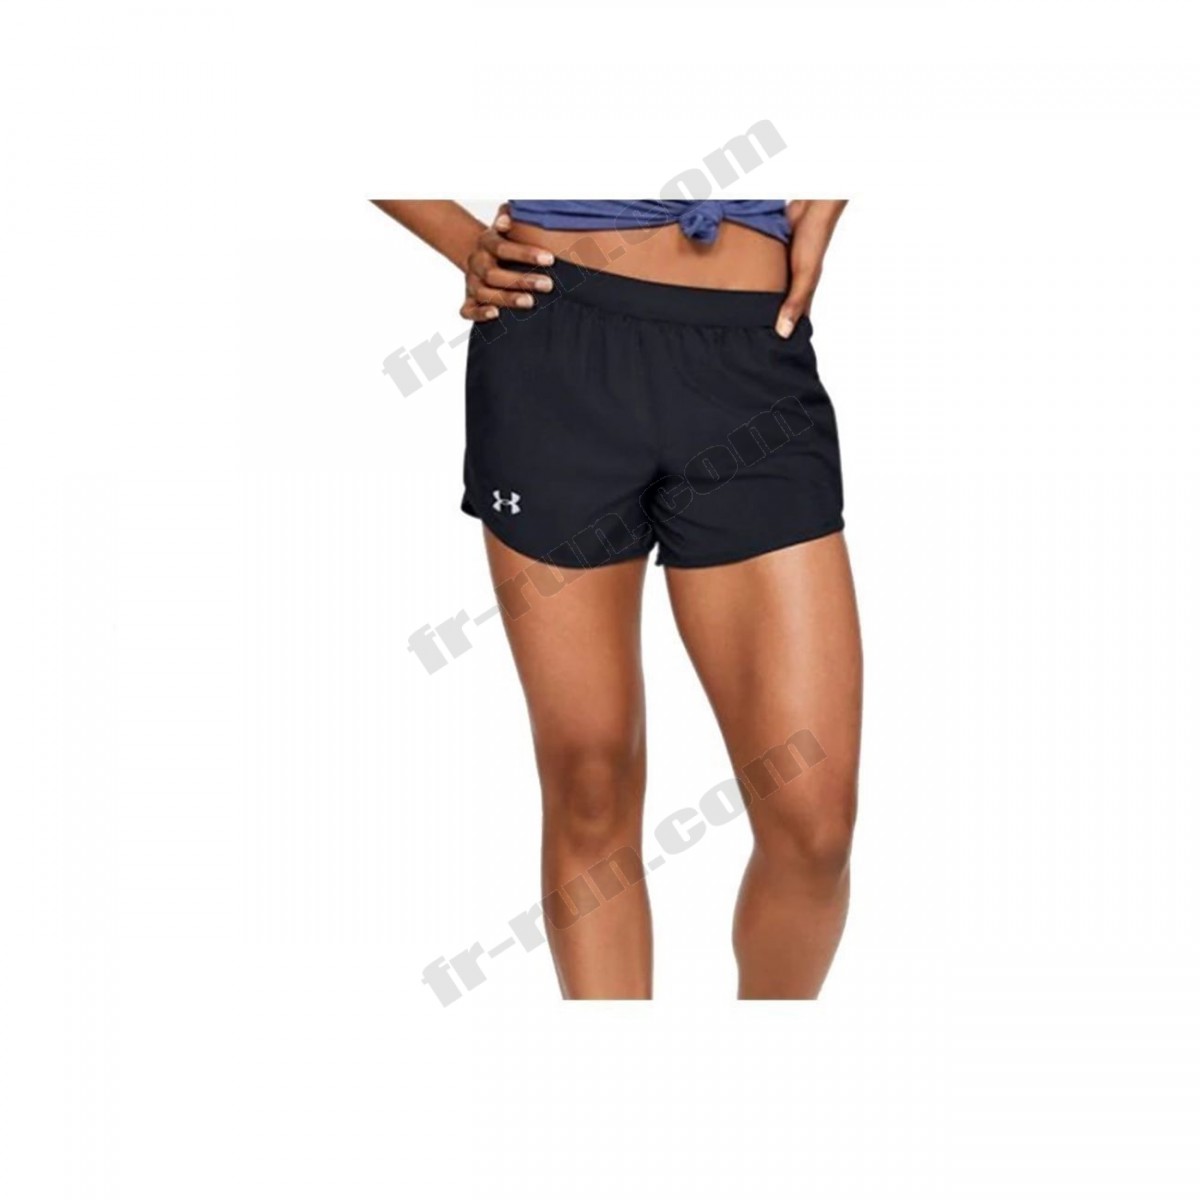 Under Armour/running femme UNDER ARMOUR Under Armour Fly BY 20 Shorts √ Nouveau style √ Soldes - Under Armour/running femme UNDER ARMOUR Under Armour Fly BY 20 Shorts √ Nouveau style √ Soldes